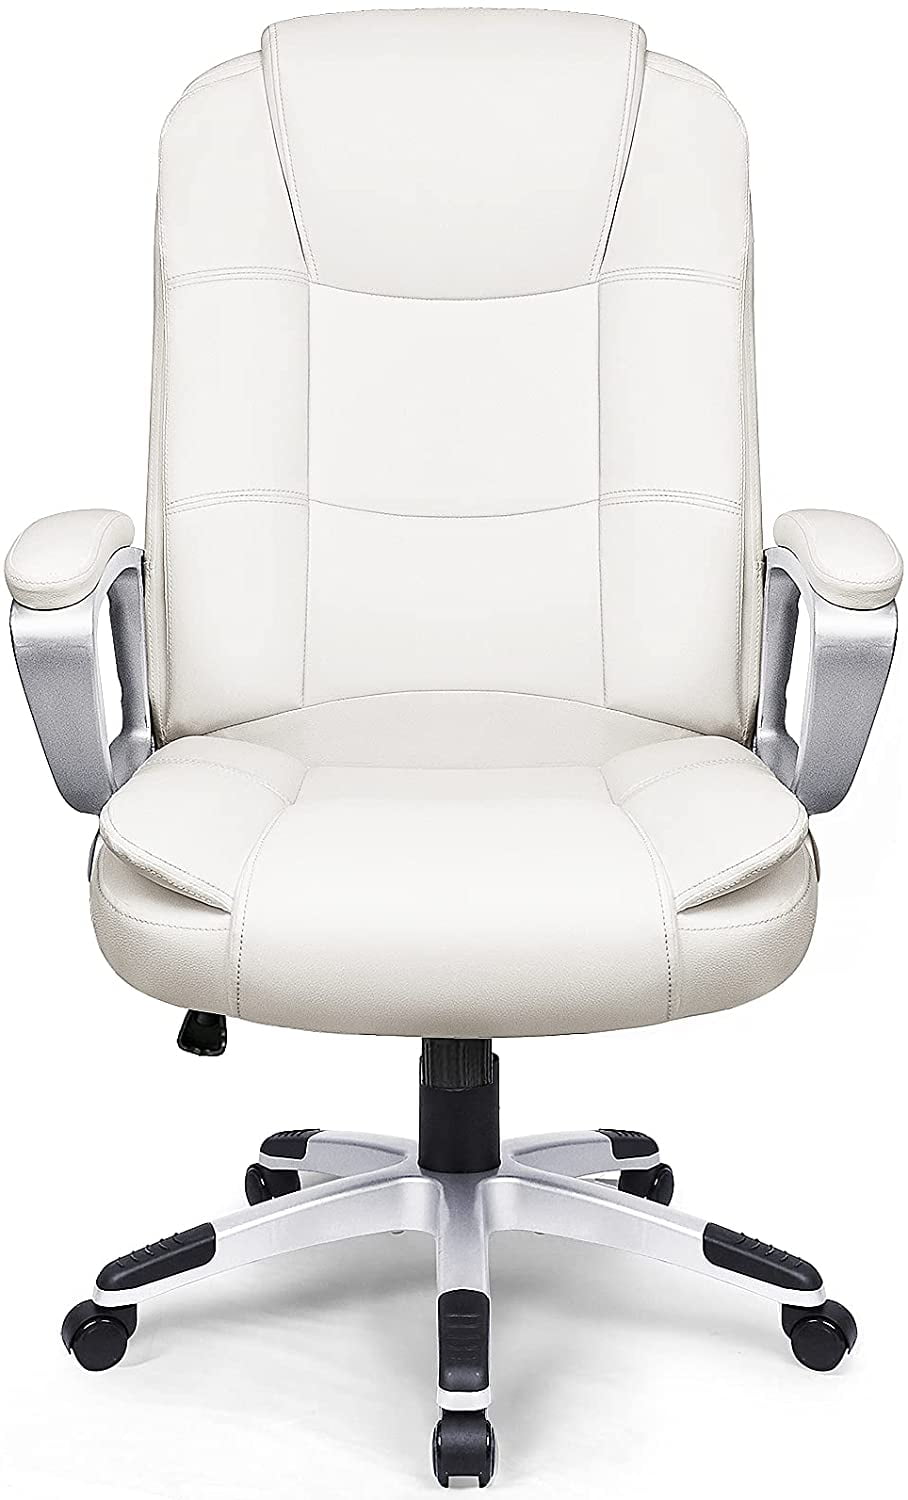 Ergonomic High Back Cushion Lumbar Support with Wheels Comfortable White Upholstered Leather Racing Seat Adjustable Swivel Rolling Home Executive NEO CHAIR Office Chair Computer Desk Chair Gaming